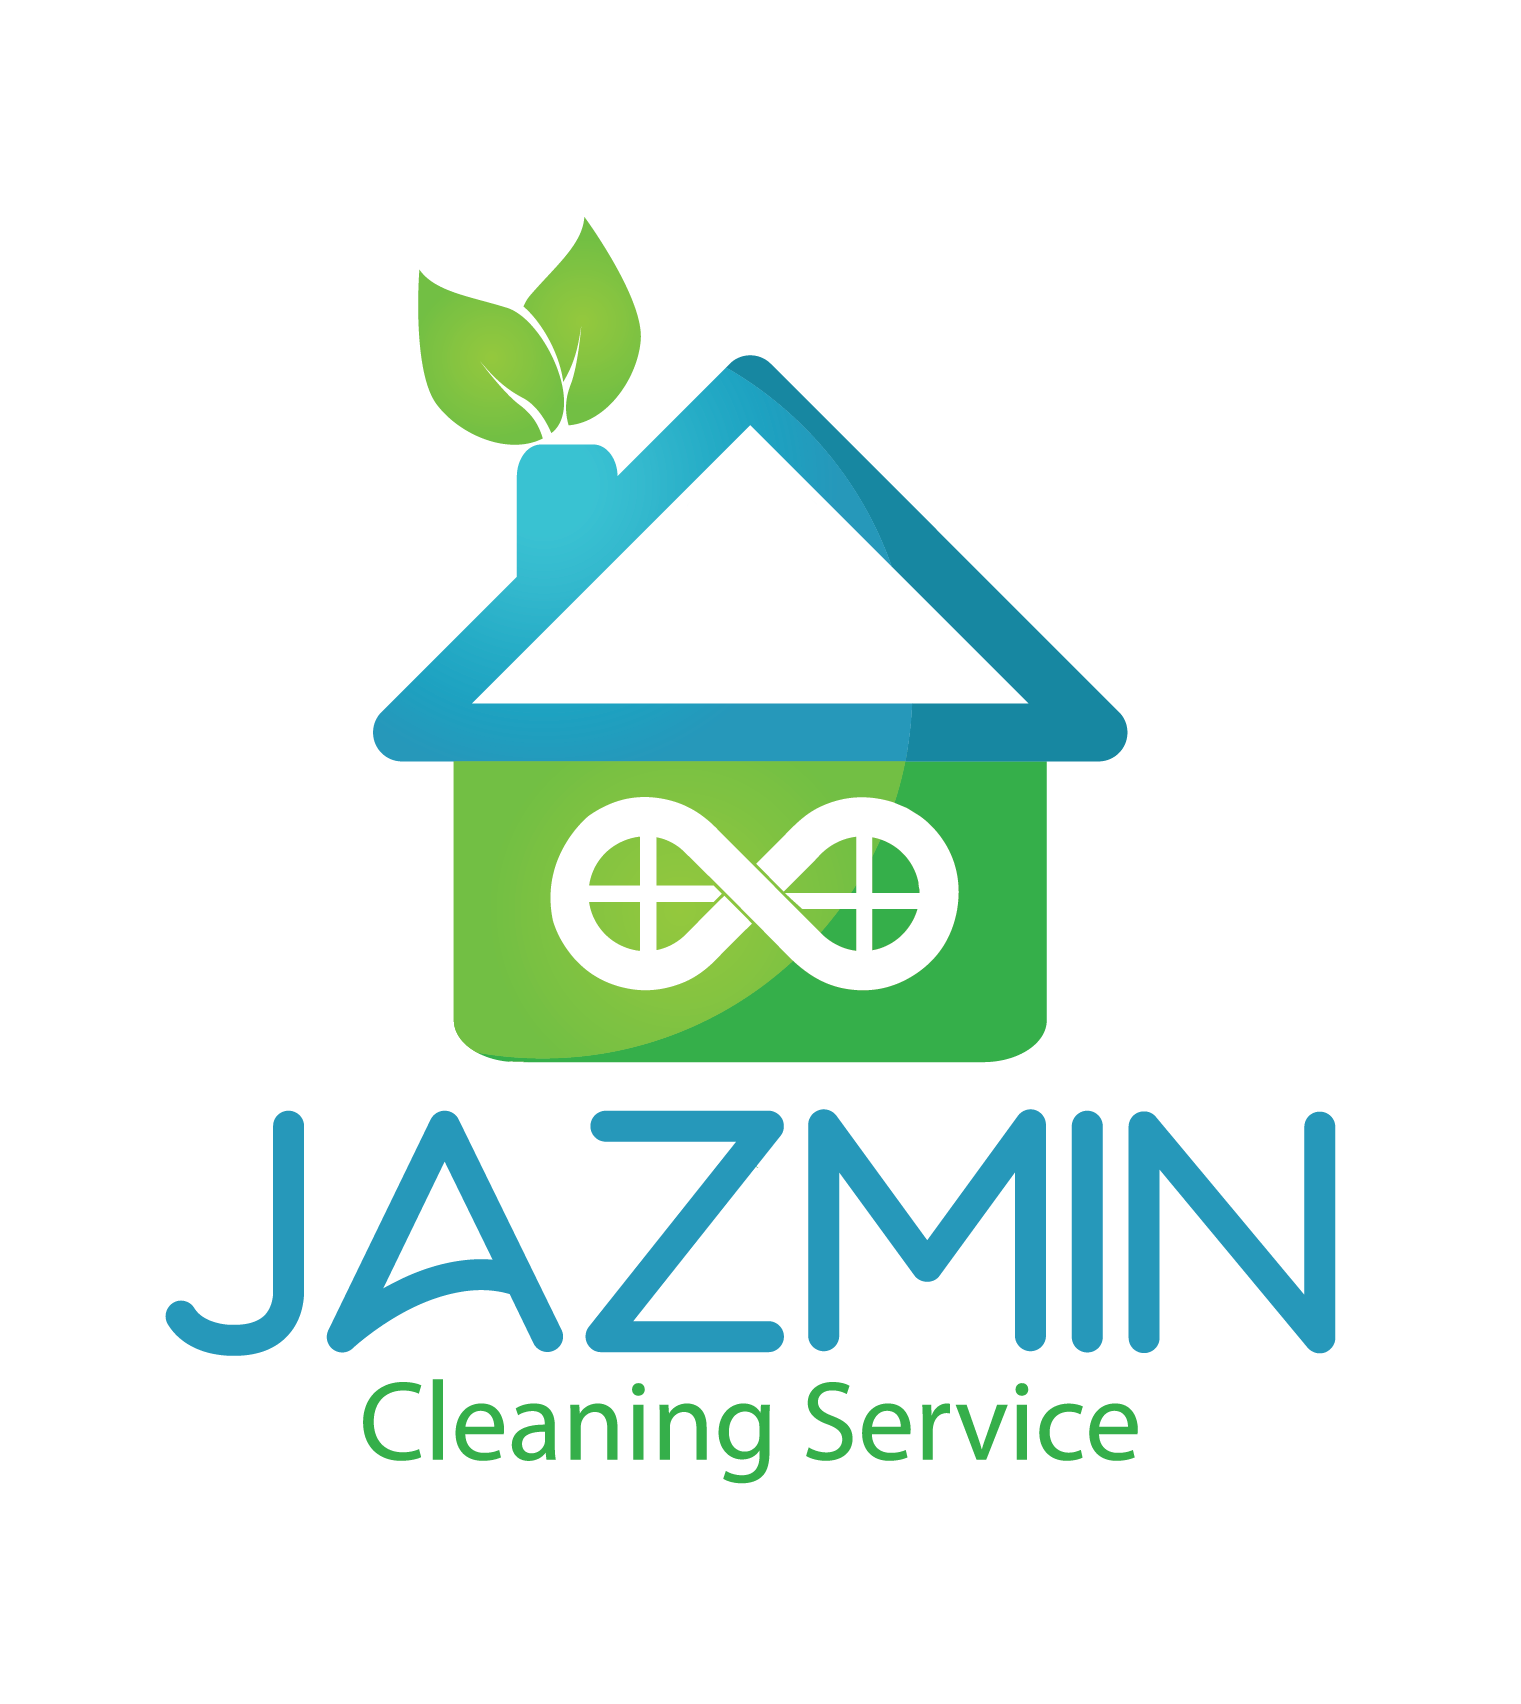 Logo of Jazmin Cleaning Service Cleaning Services - Domestic In Staffordshire